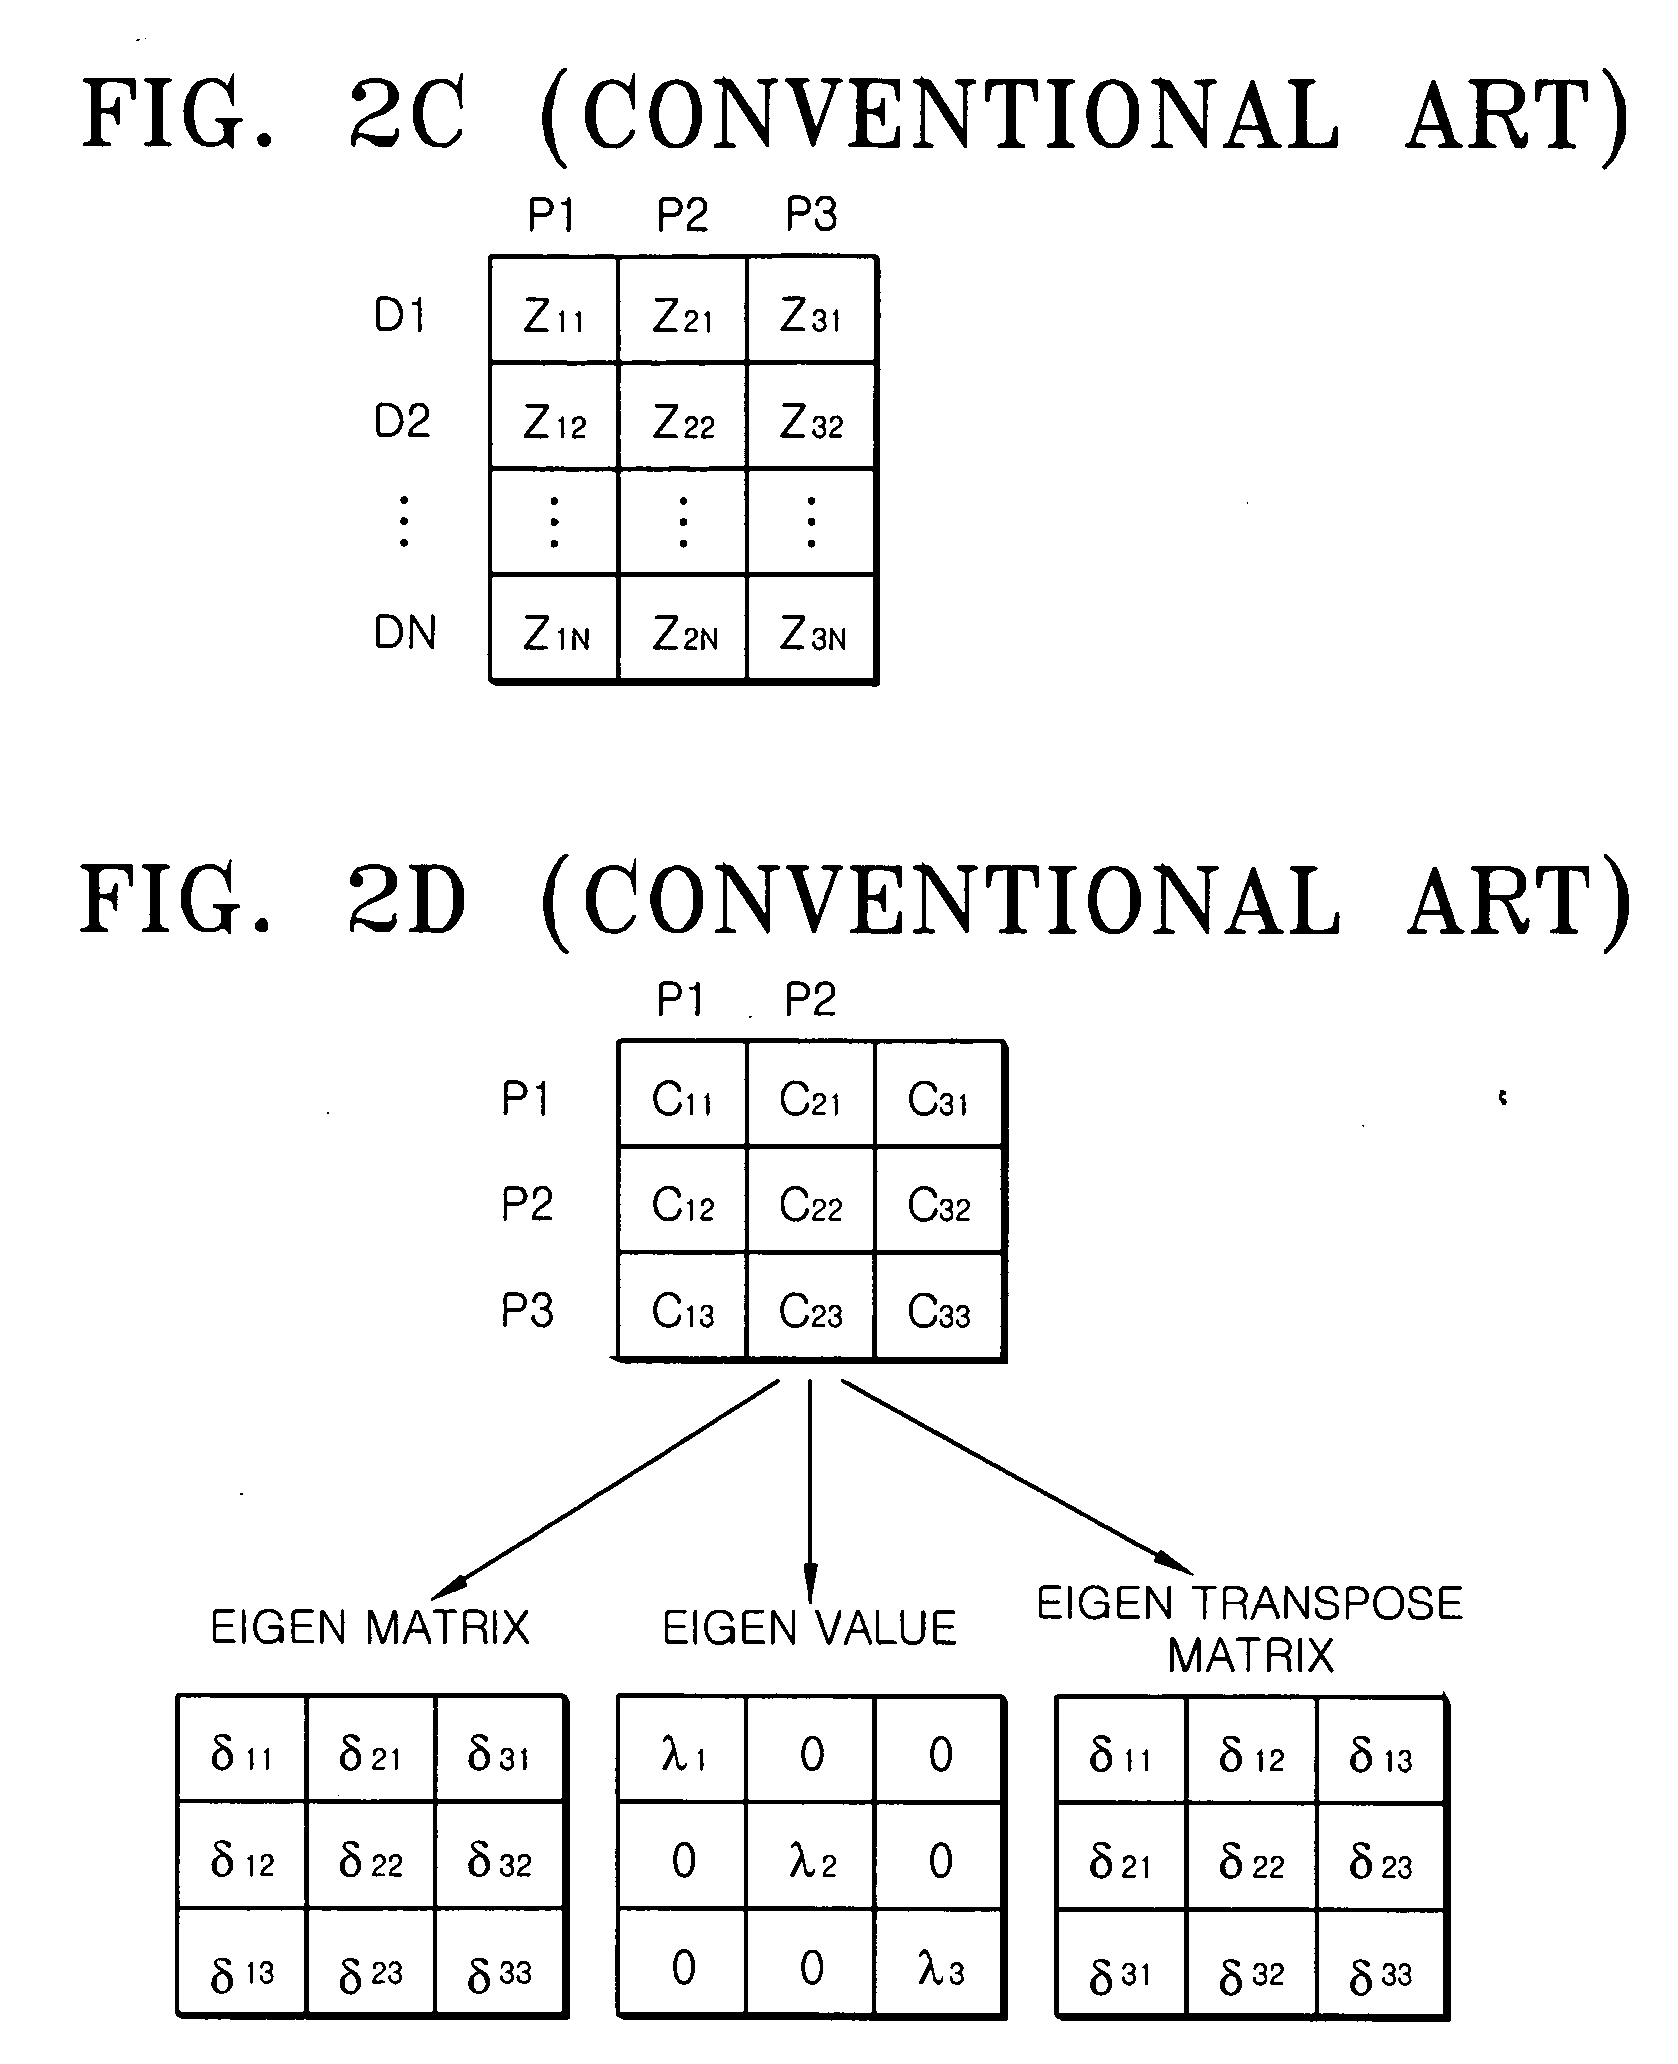 Method and apparatus for modeling multivariate parameters having constants and same pattern and method of fabricating semiconductor using the same